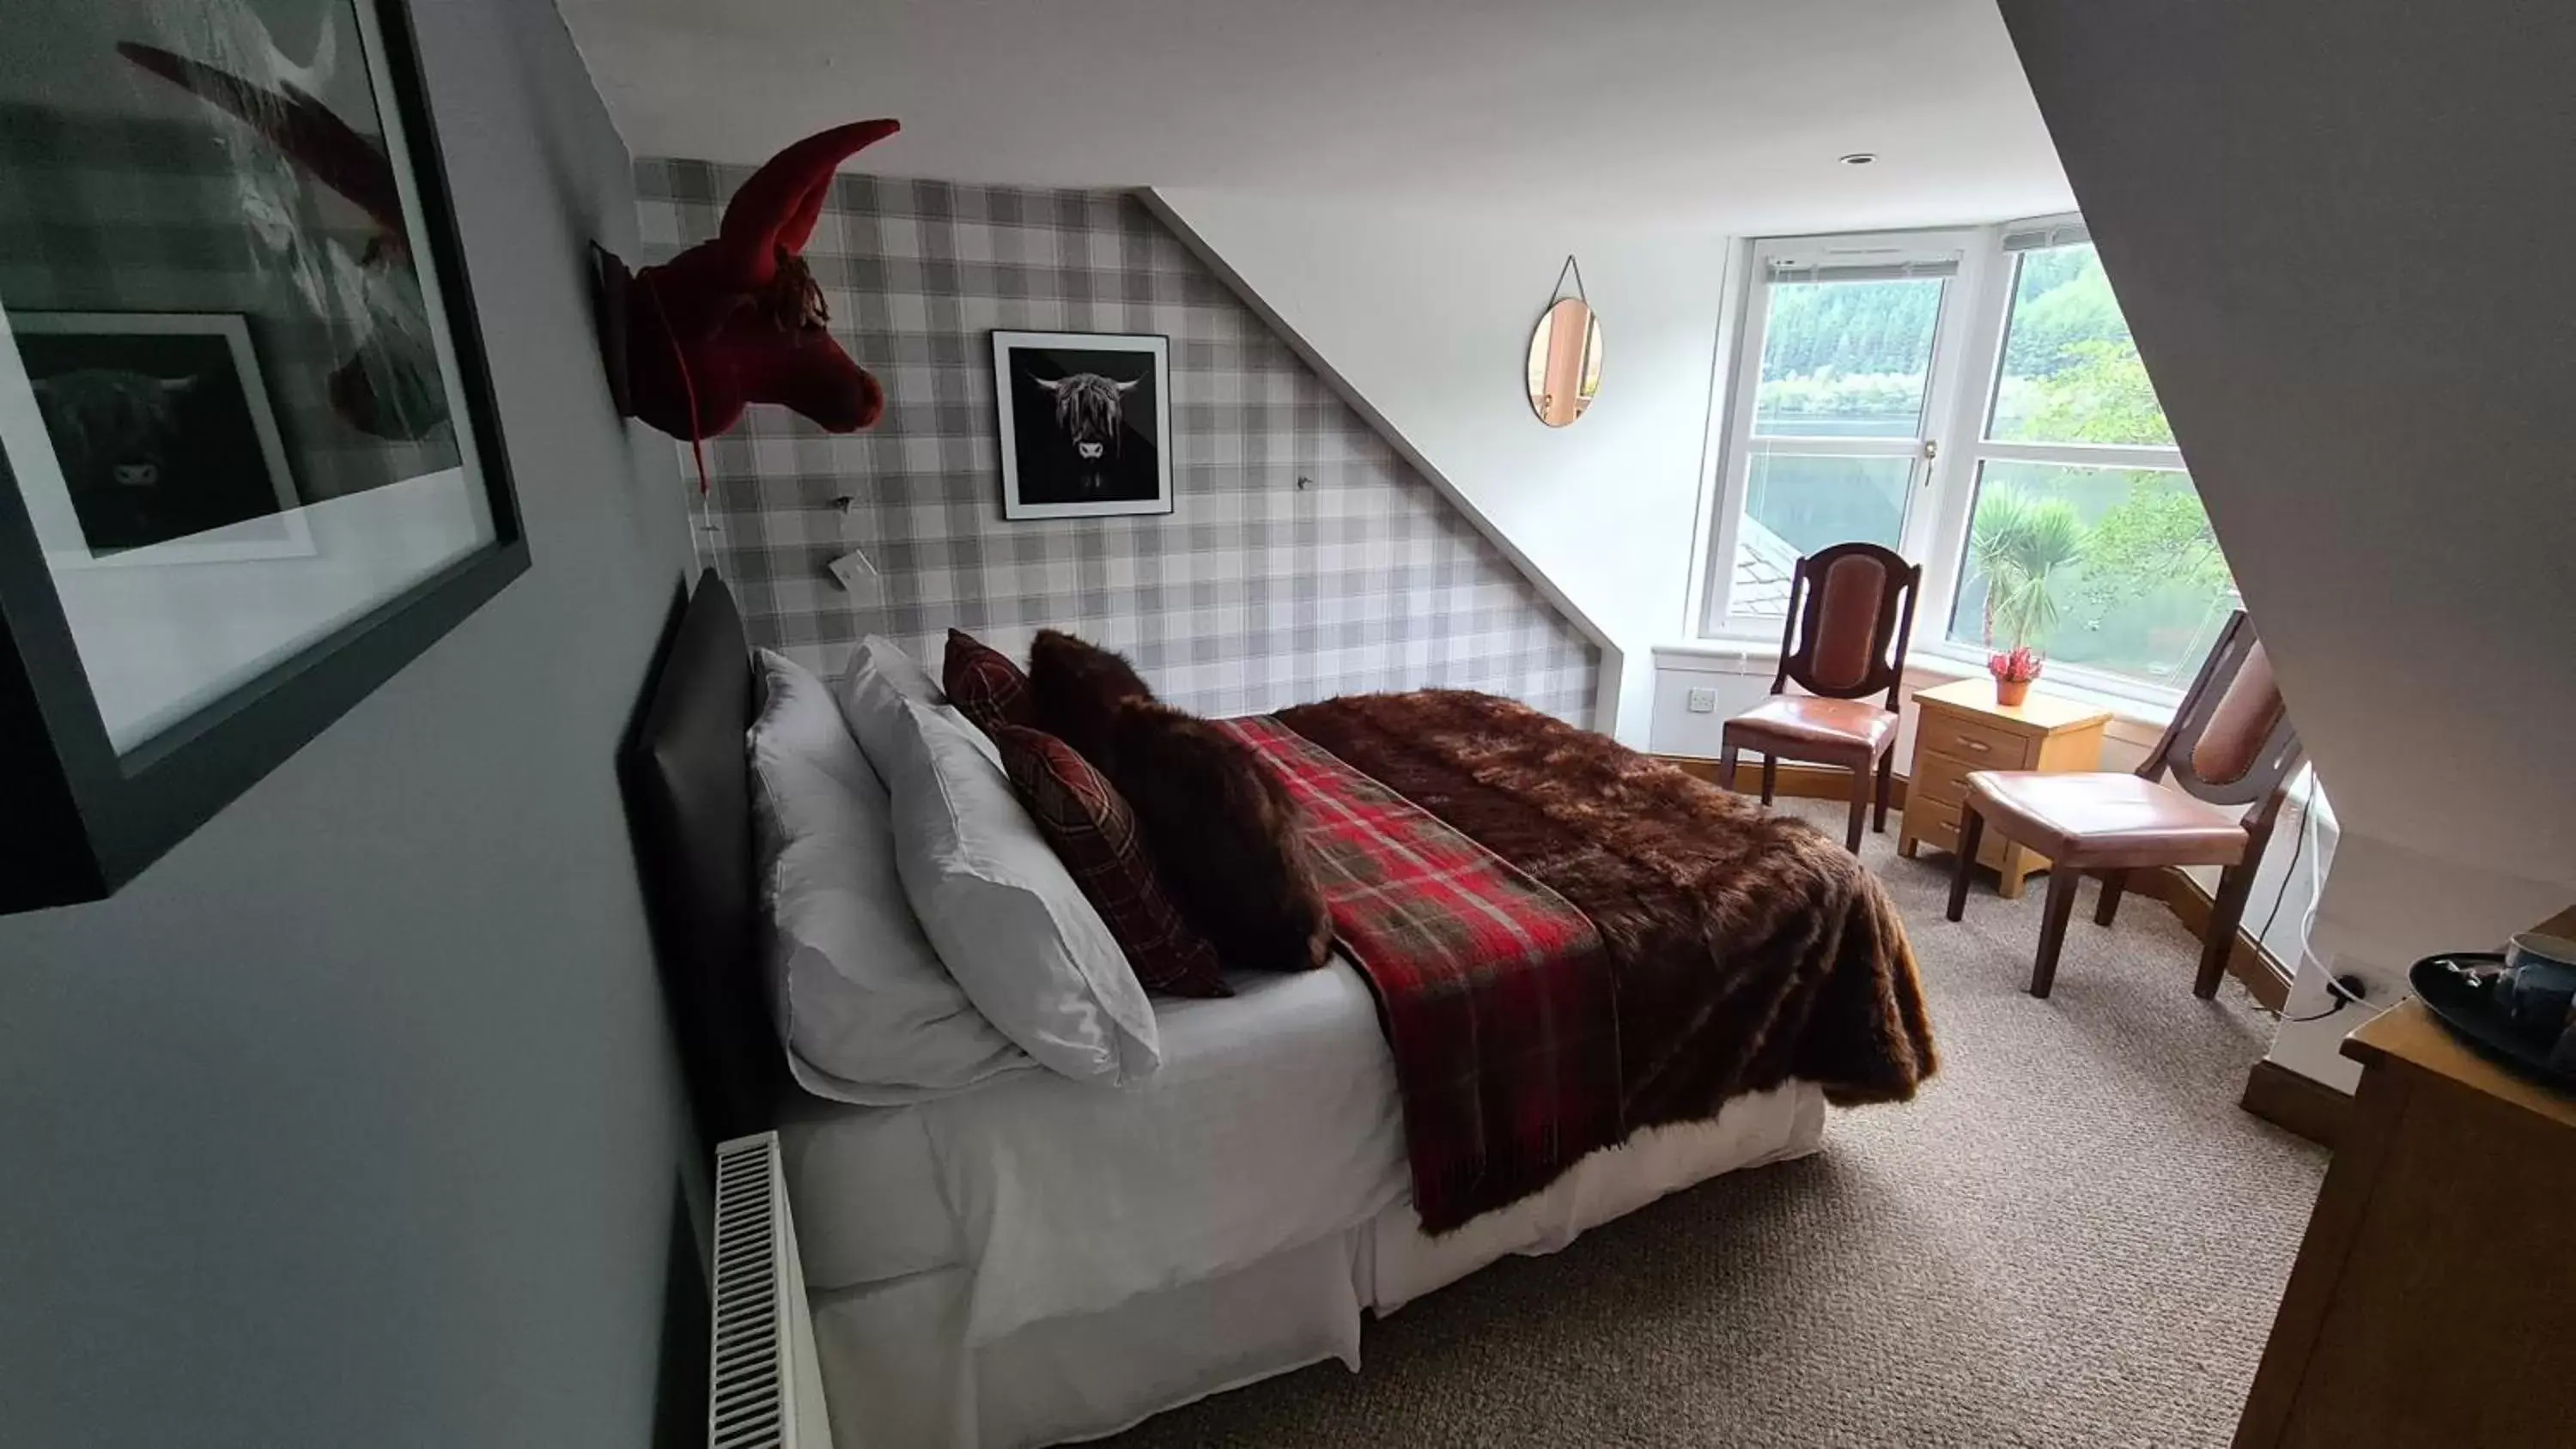 Bed in The Coylet Inn by Loch Eck